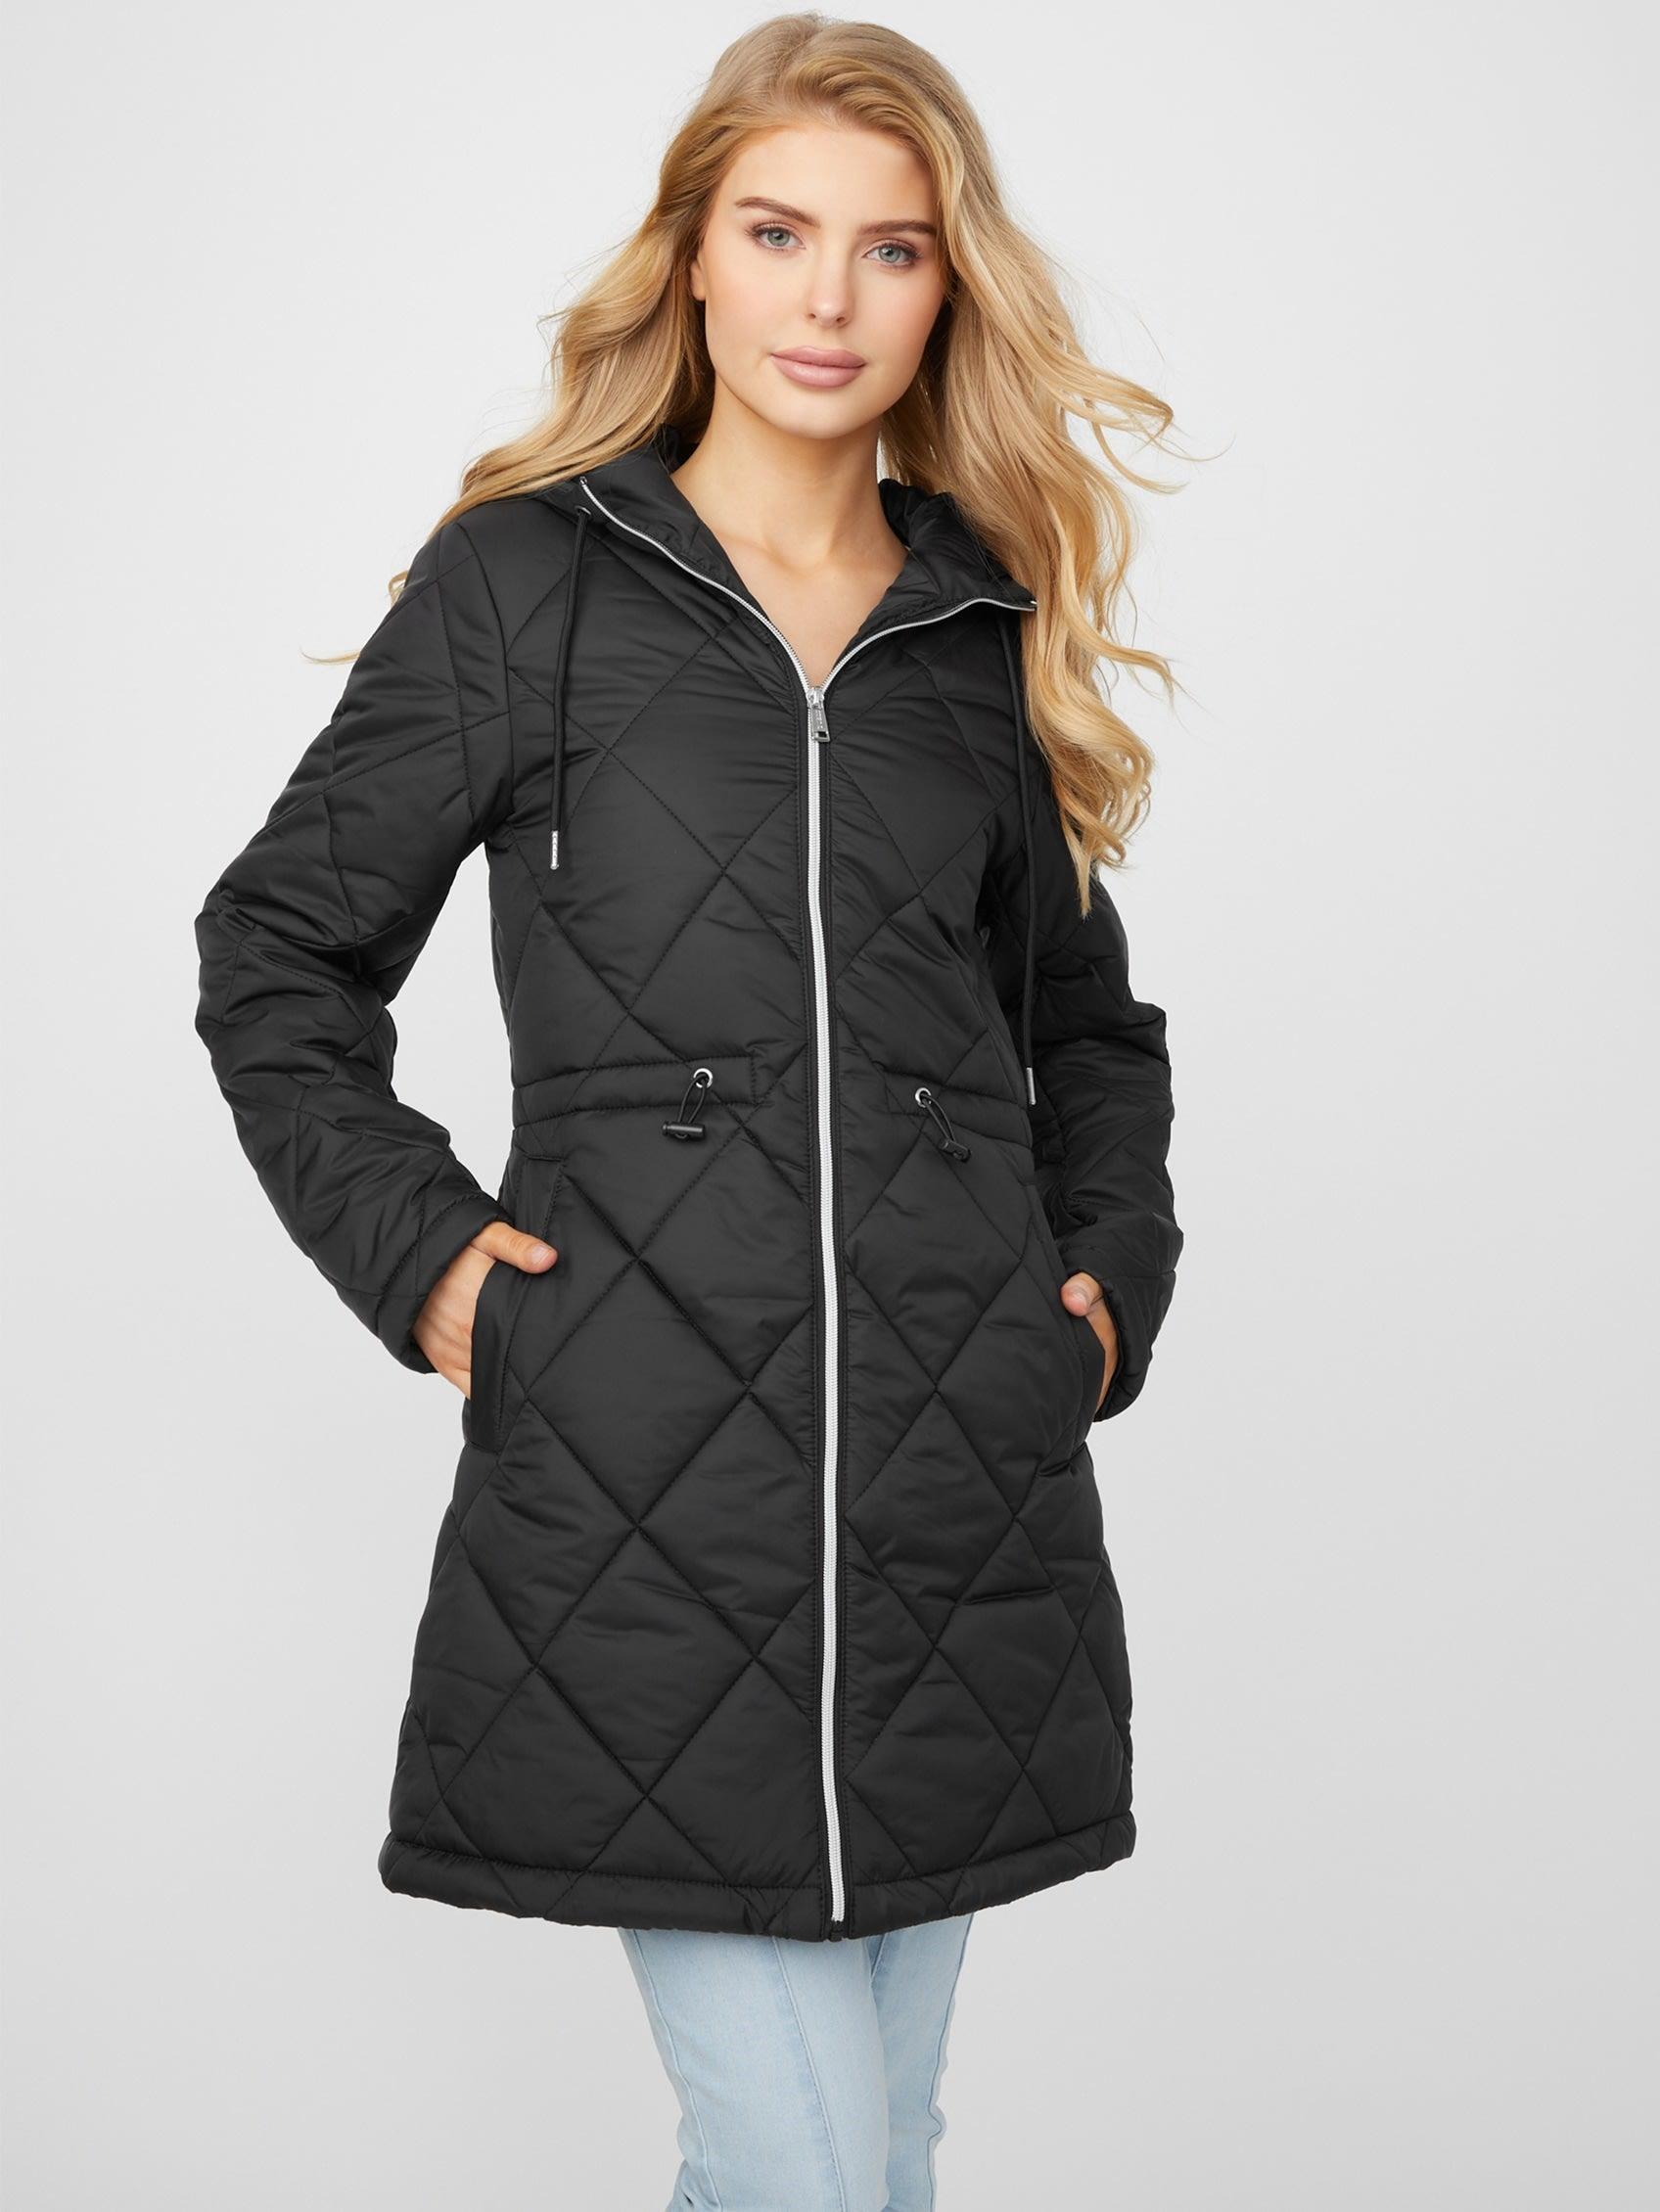 Guess Factory Ofira Quilted Coat in Black | Lyst